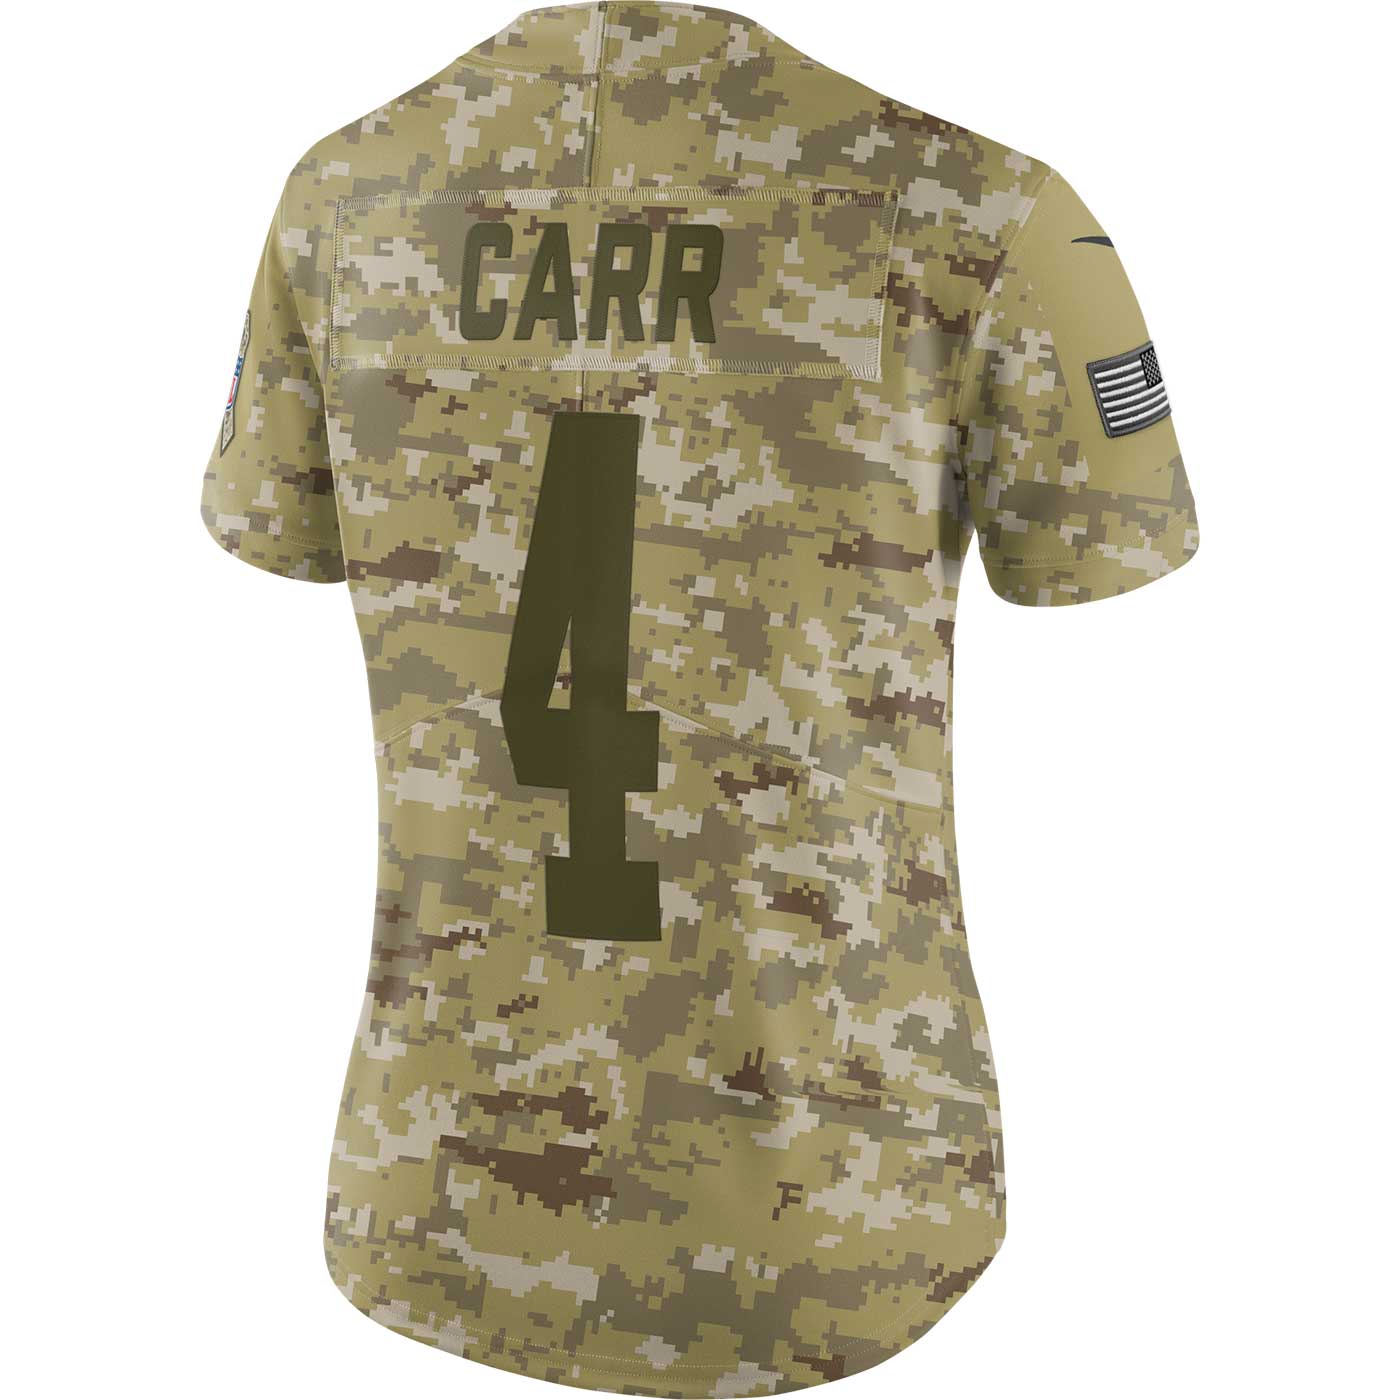 salute to service jersey 2018